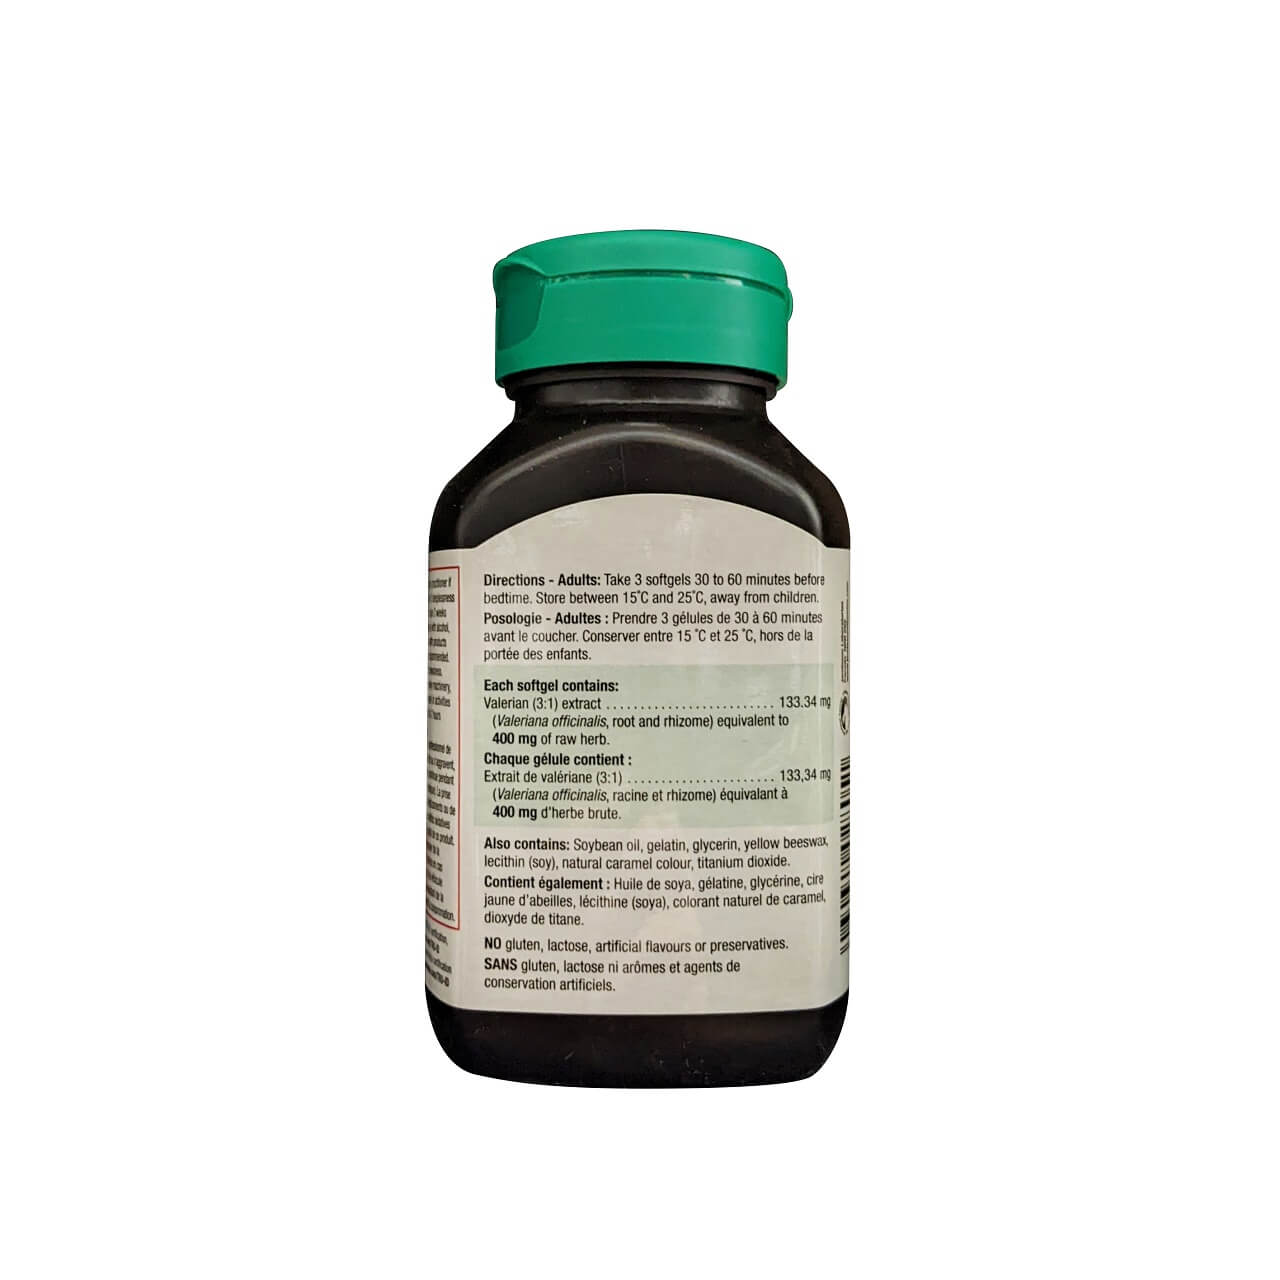 Directions and ingredients for Jamieson Valerian 400 mg (60 softgels)